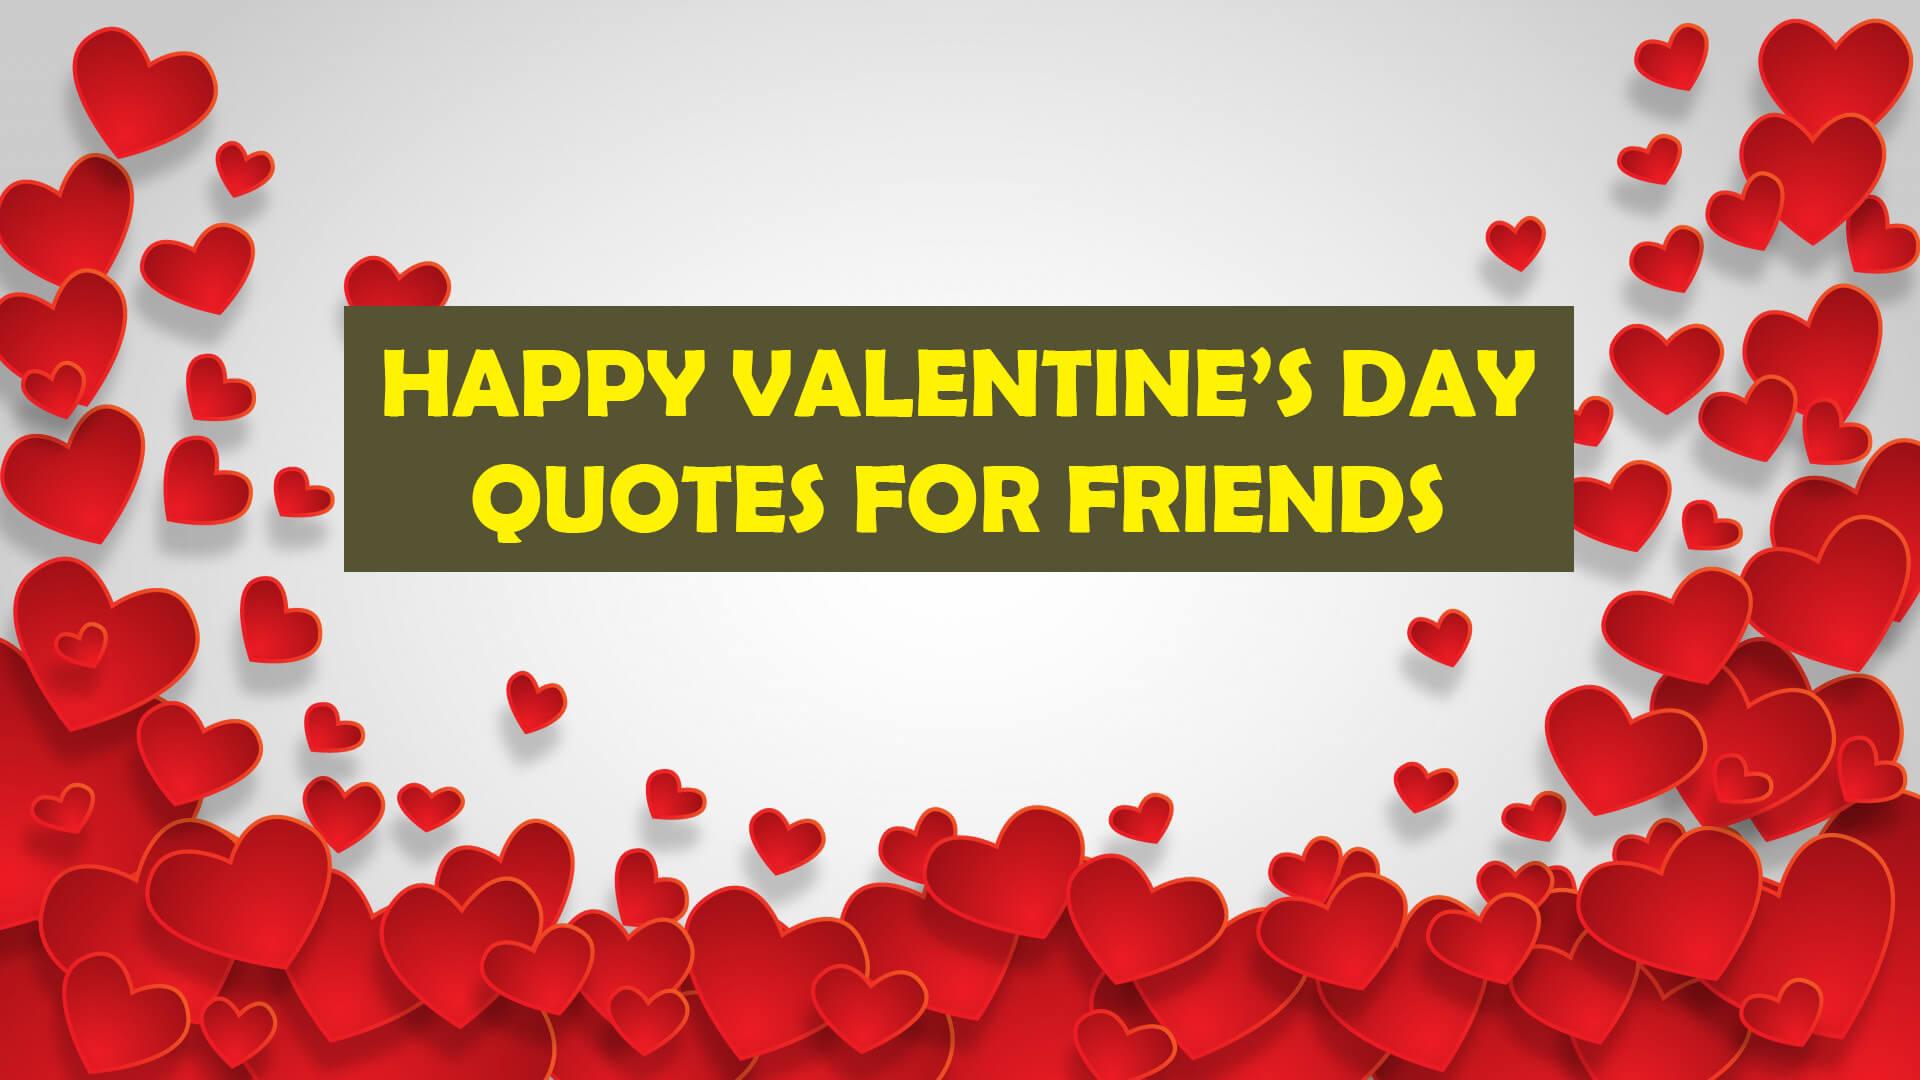 Valentines Day 2020 Wallpapers - Wallpaper Cave